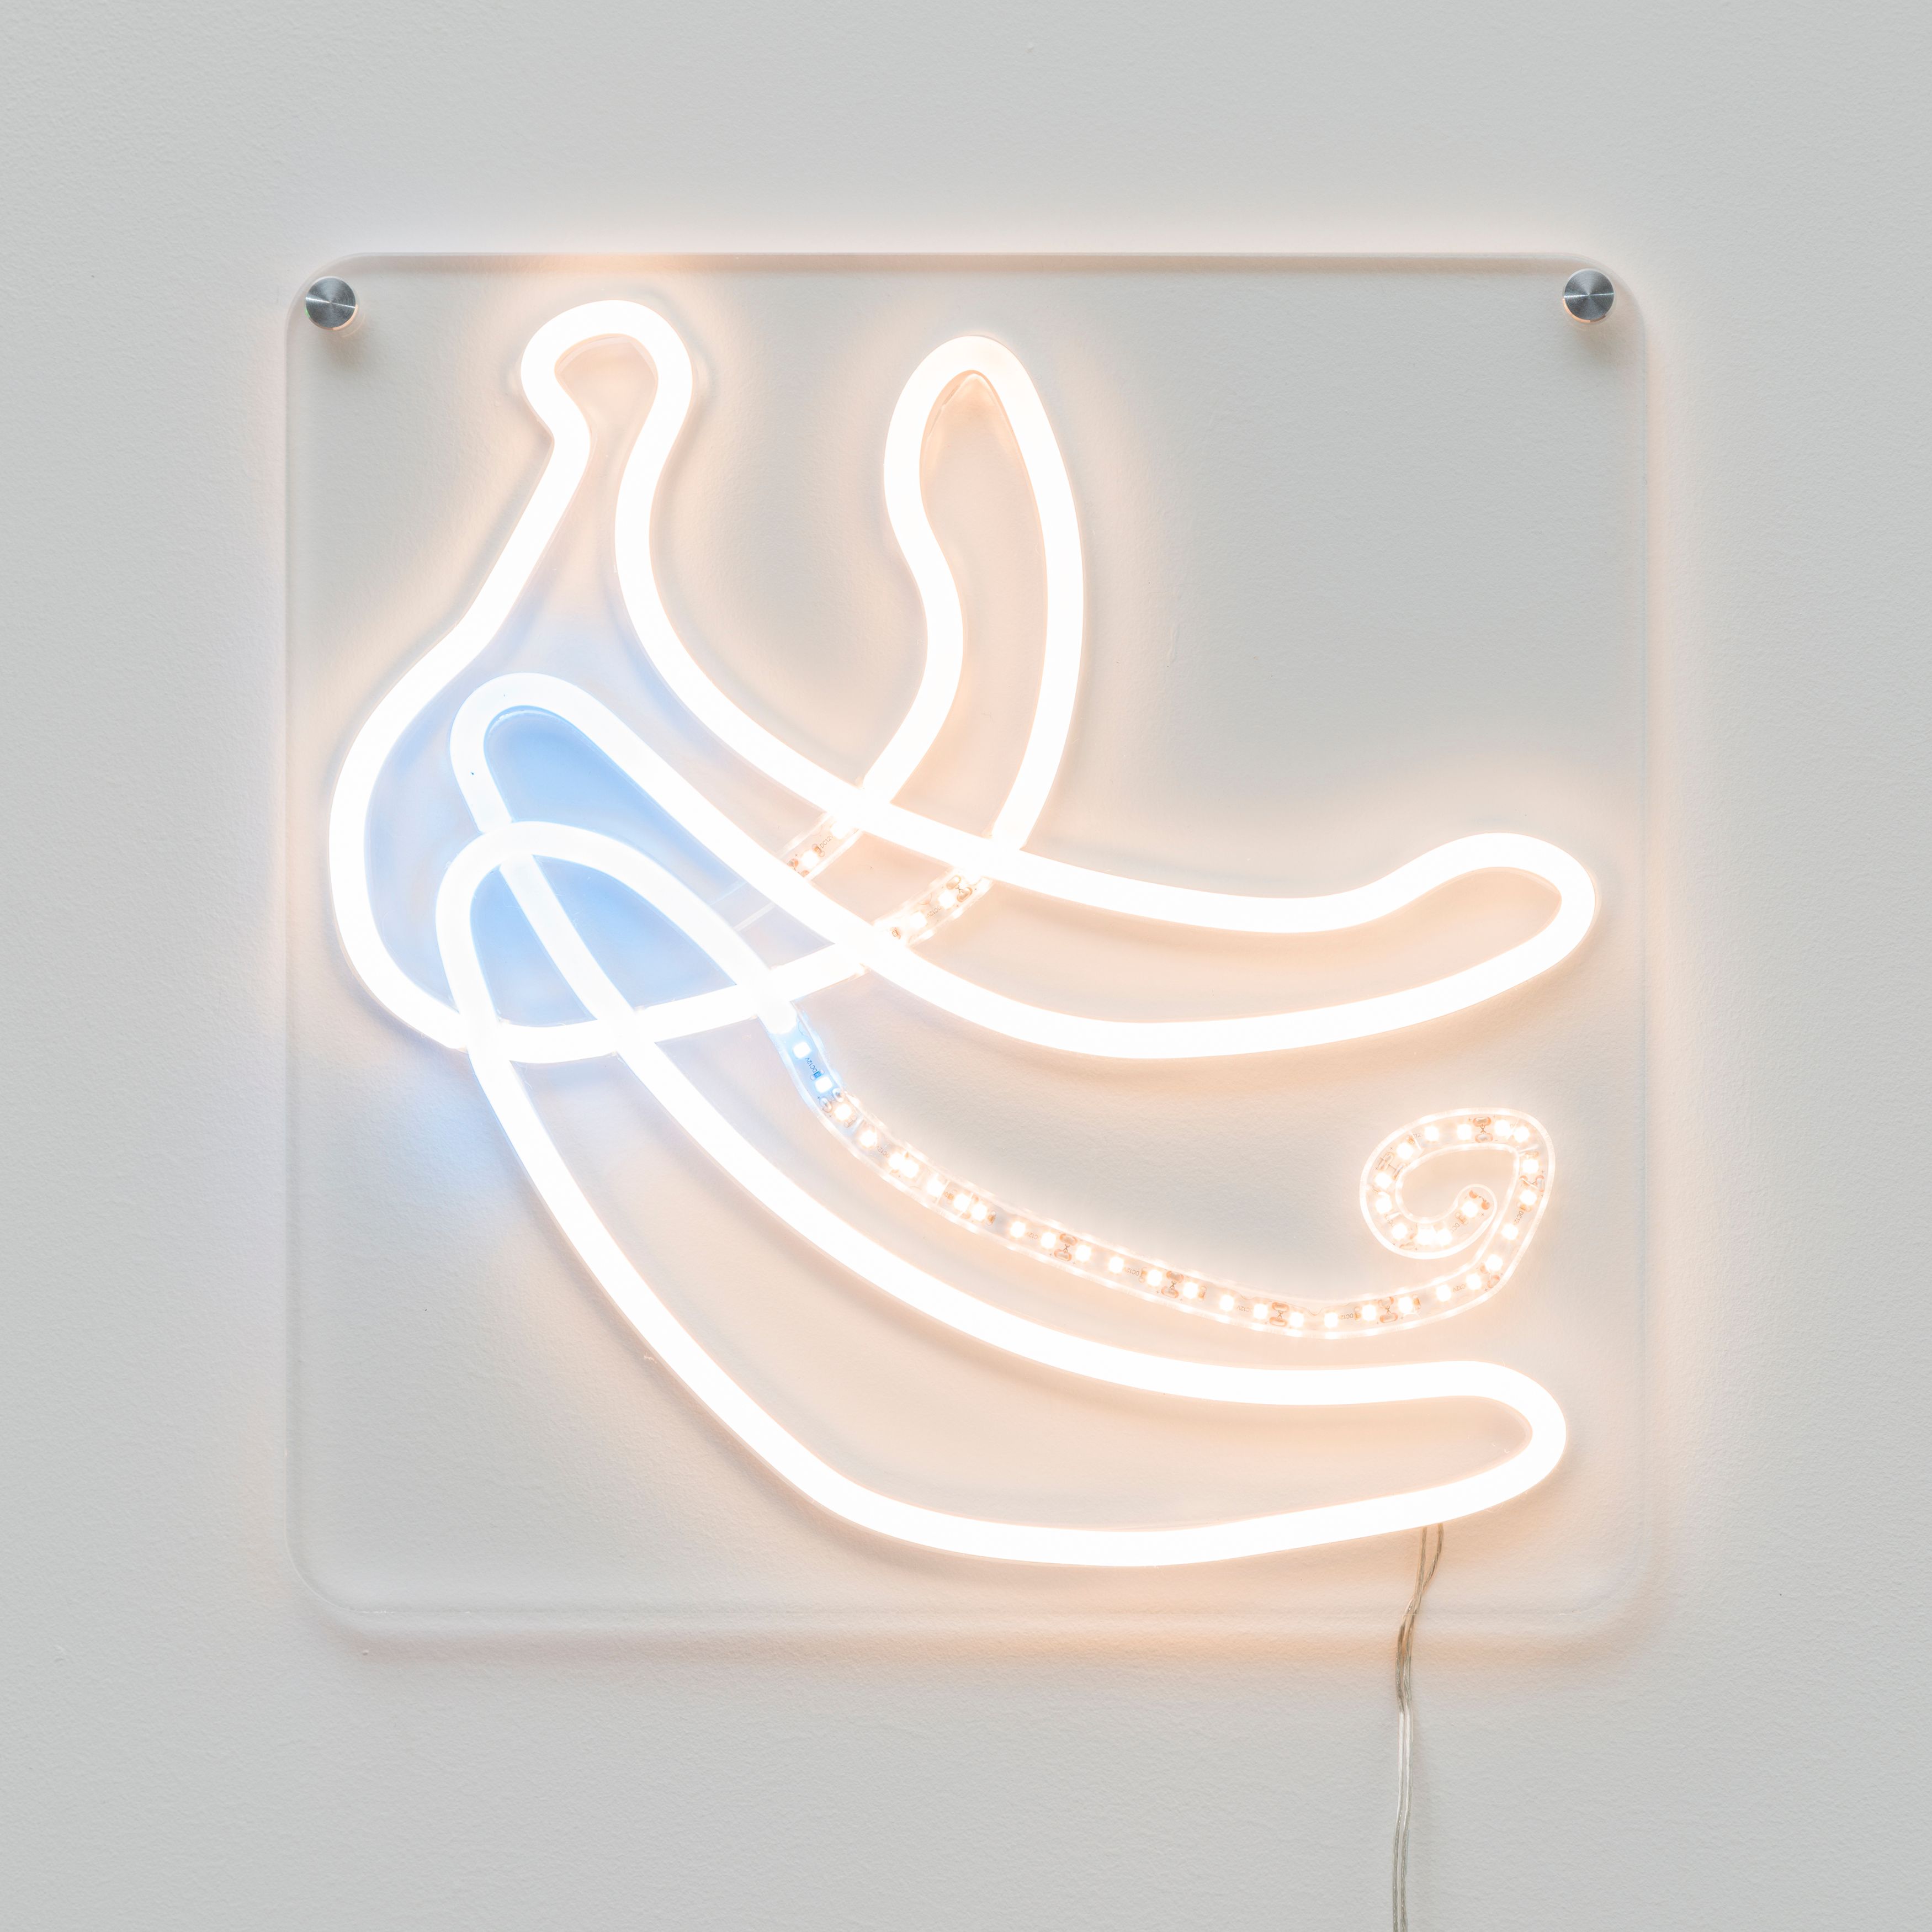 Choey Eun Young Cho, Bananananana (banana23), 2022, CNC engraved plexiglass, LED strip lights, connection wires, silicone tubes, 12 x 12 in. (30.48 x 30.48 cm)